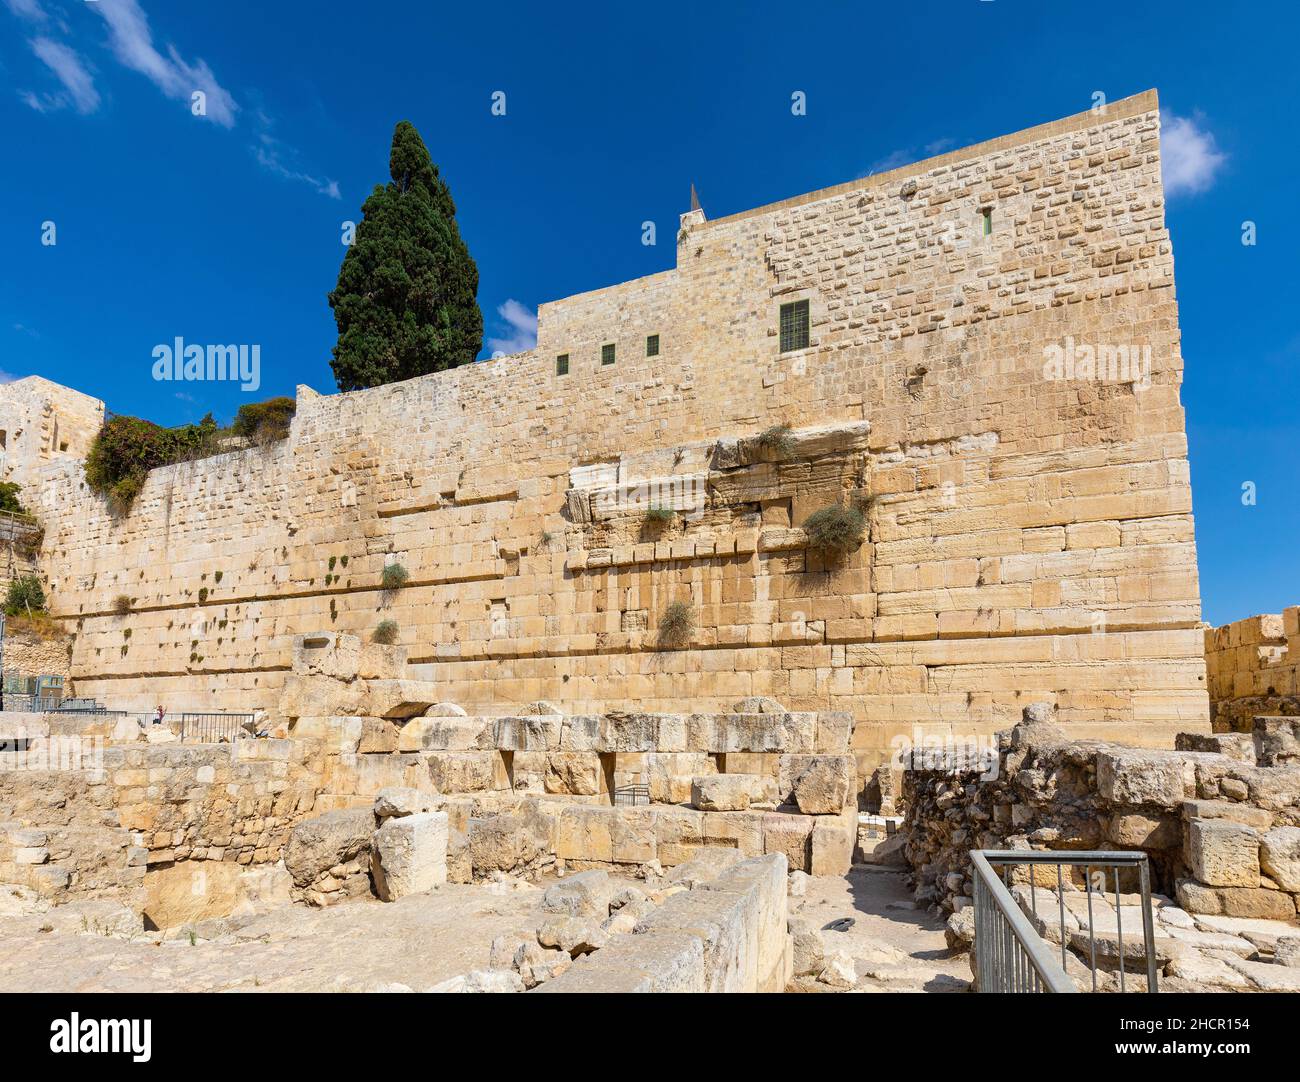 Jerusalem, Israel - October 13, 2017: South-eastern corner of Temple Mount walls with Robinson’s Arch and Davidson Center archeological park Stock Photo